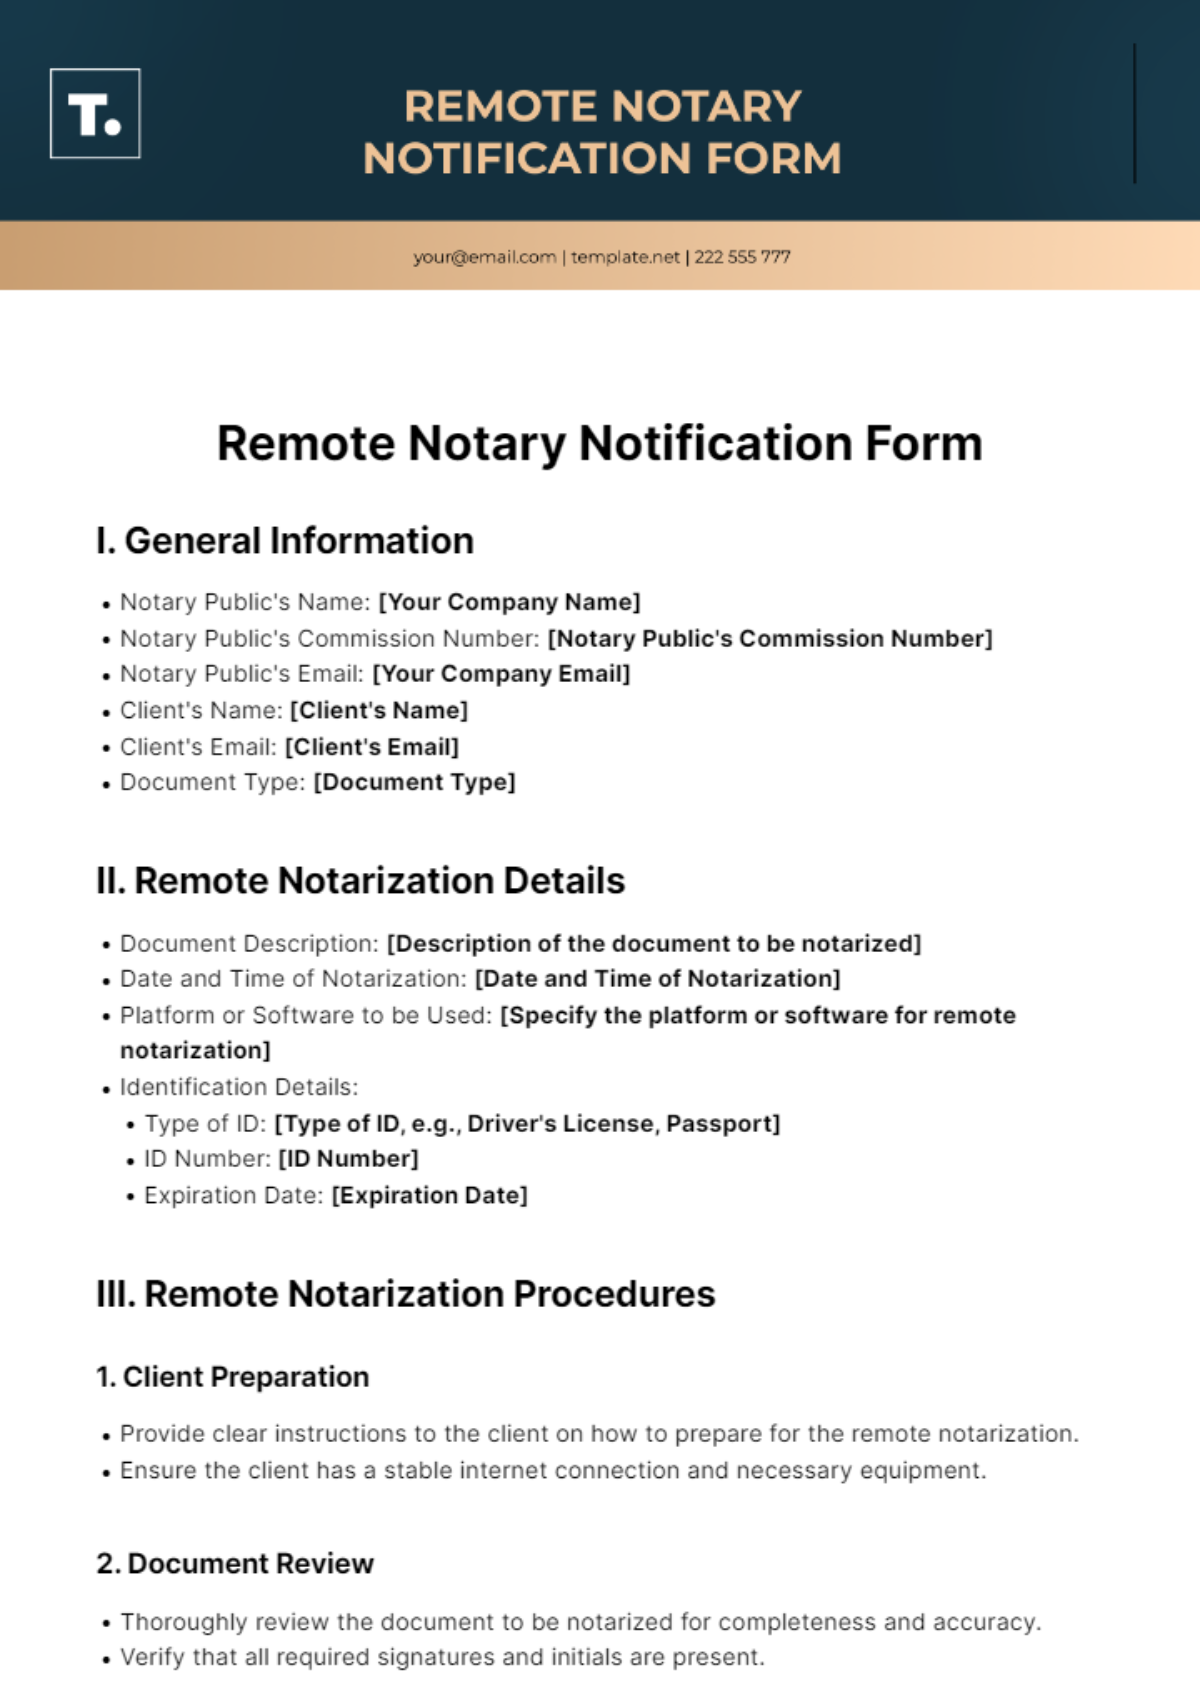 Remote Notary Notification Form Template